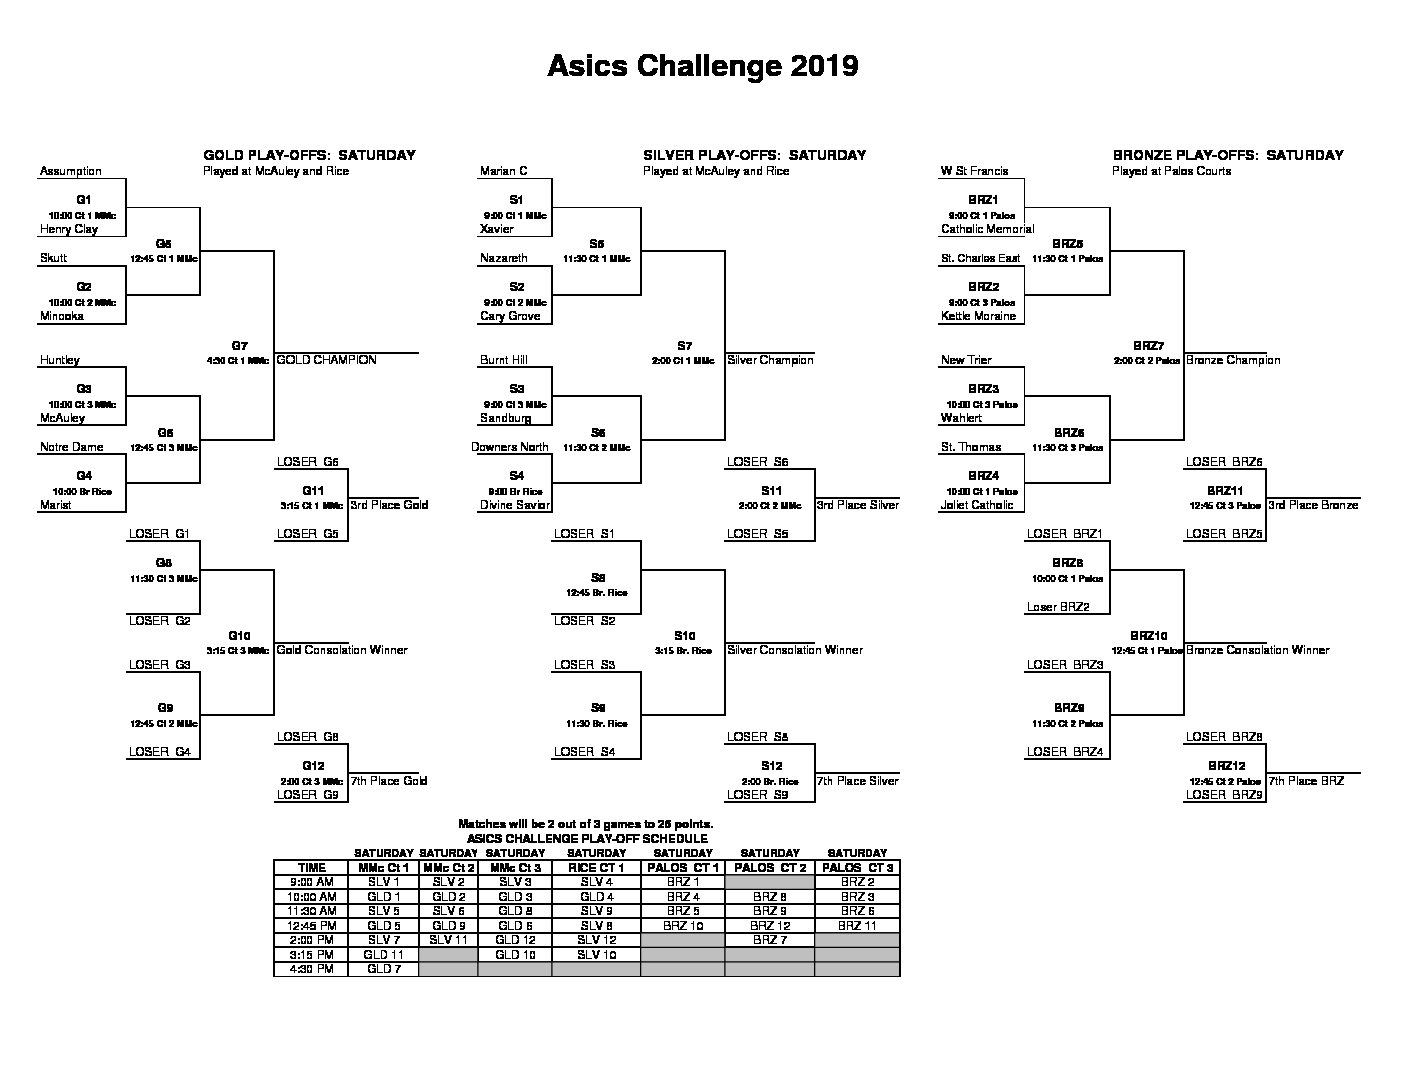 Illinois teams earn four spots in Gold Bracket at the Asics Challenge